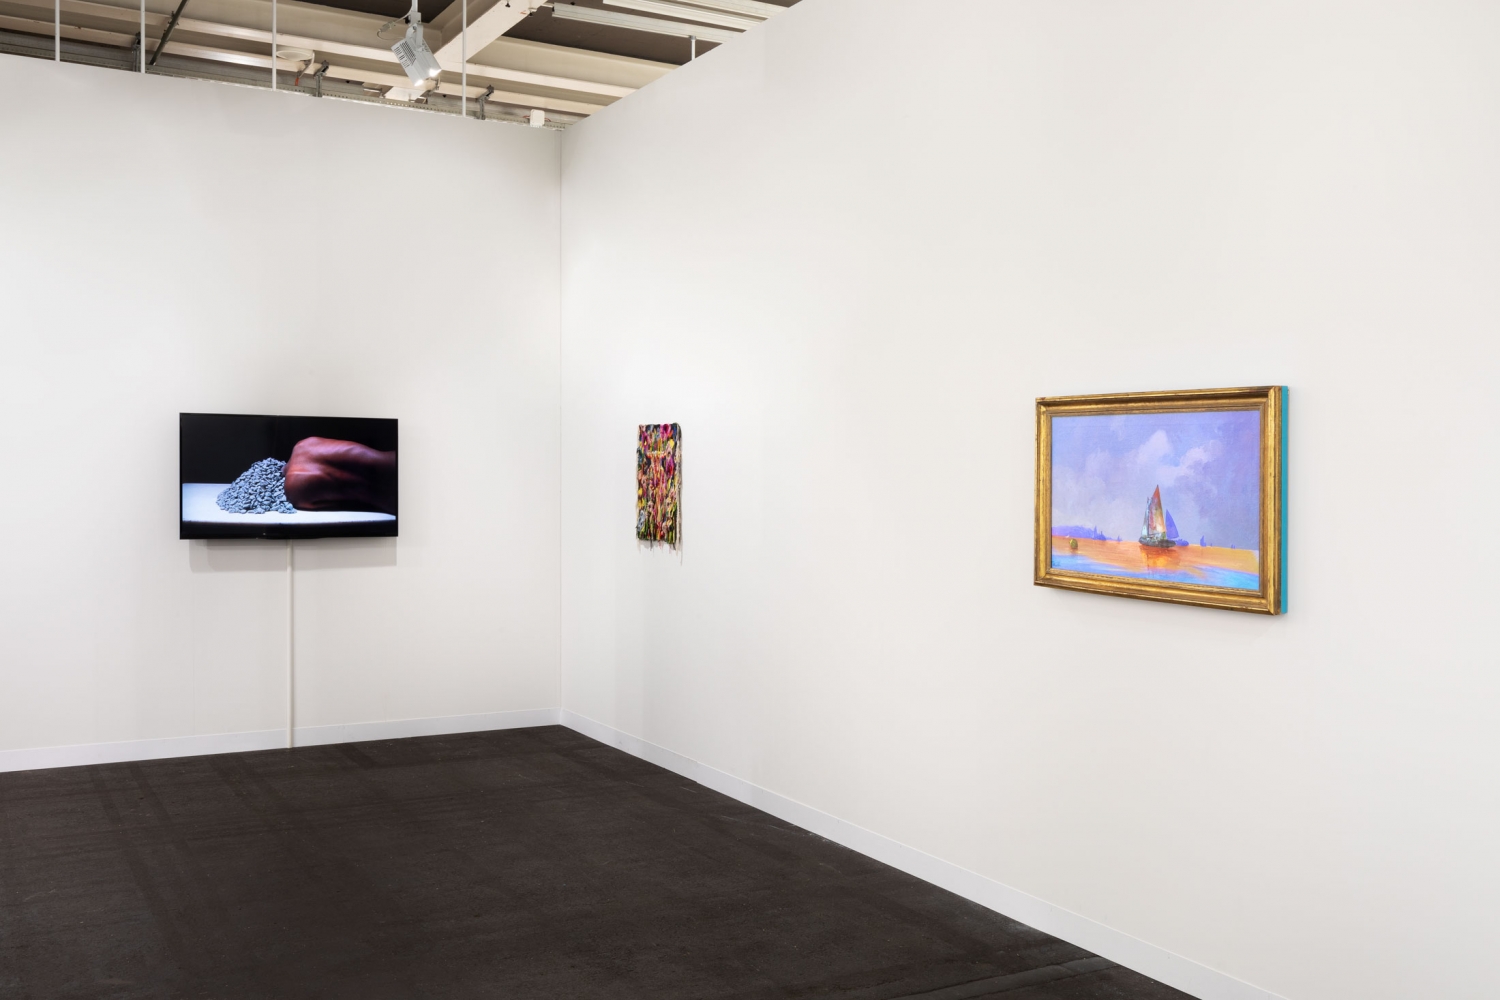 Luhring Augustine

Art Basel, Booth A3

Installation view

2019

Pictured from left: Simone Leigh, Christina Forrer, Pipilotti Rist